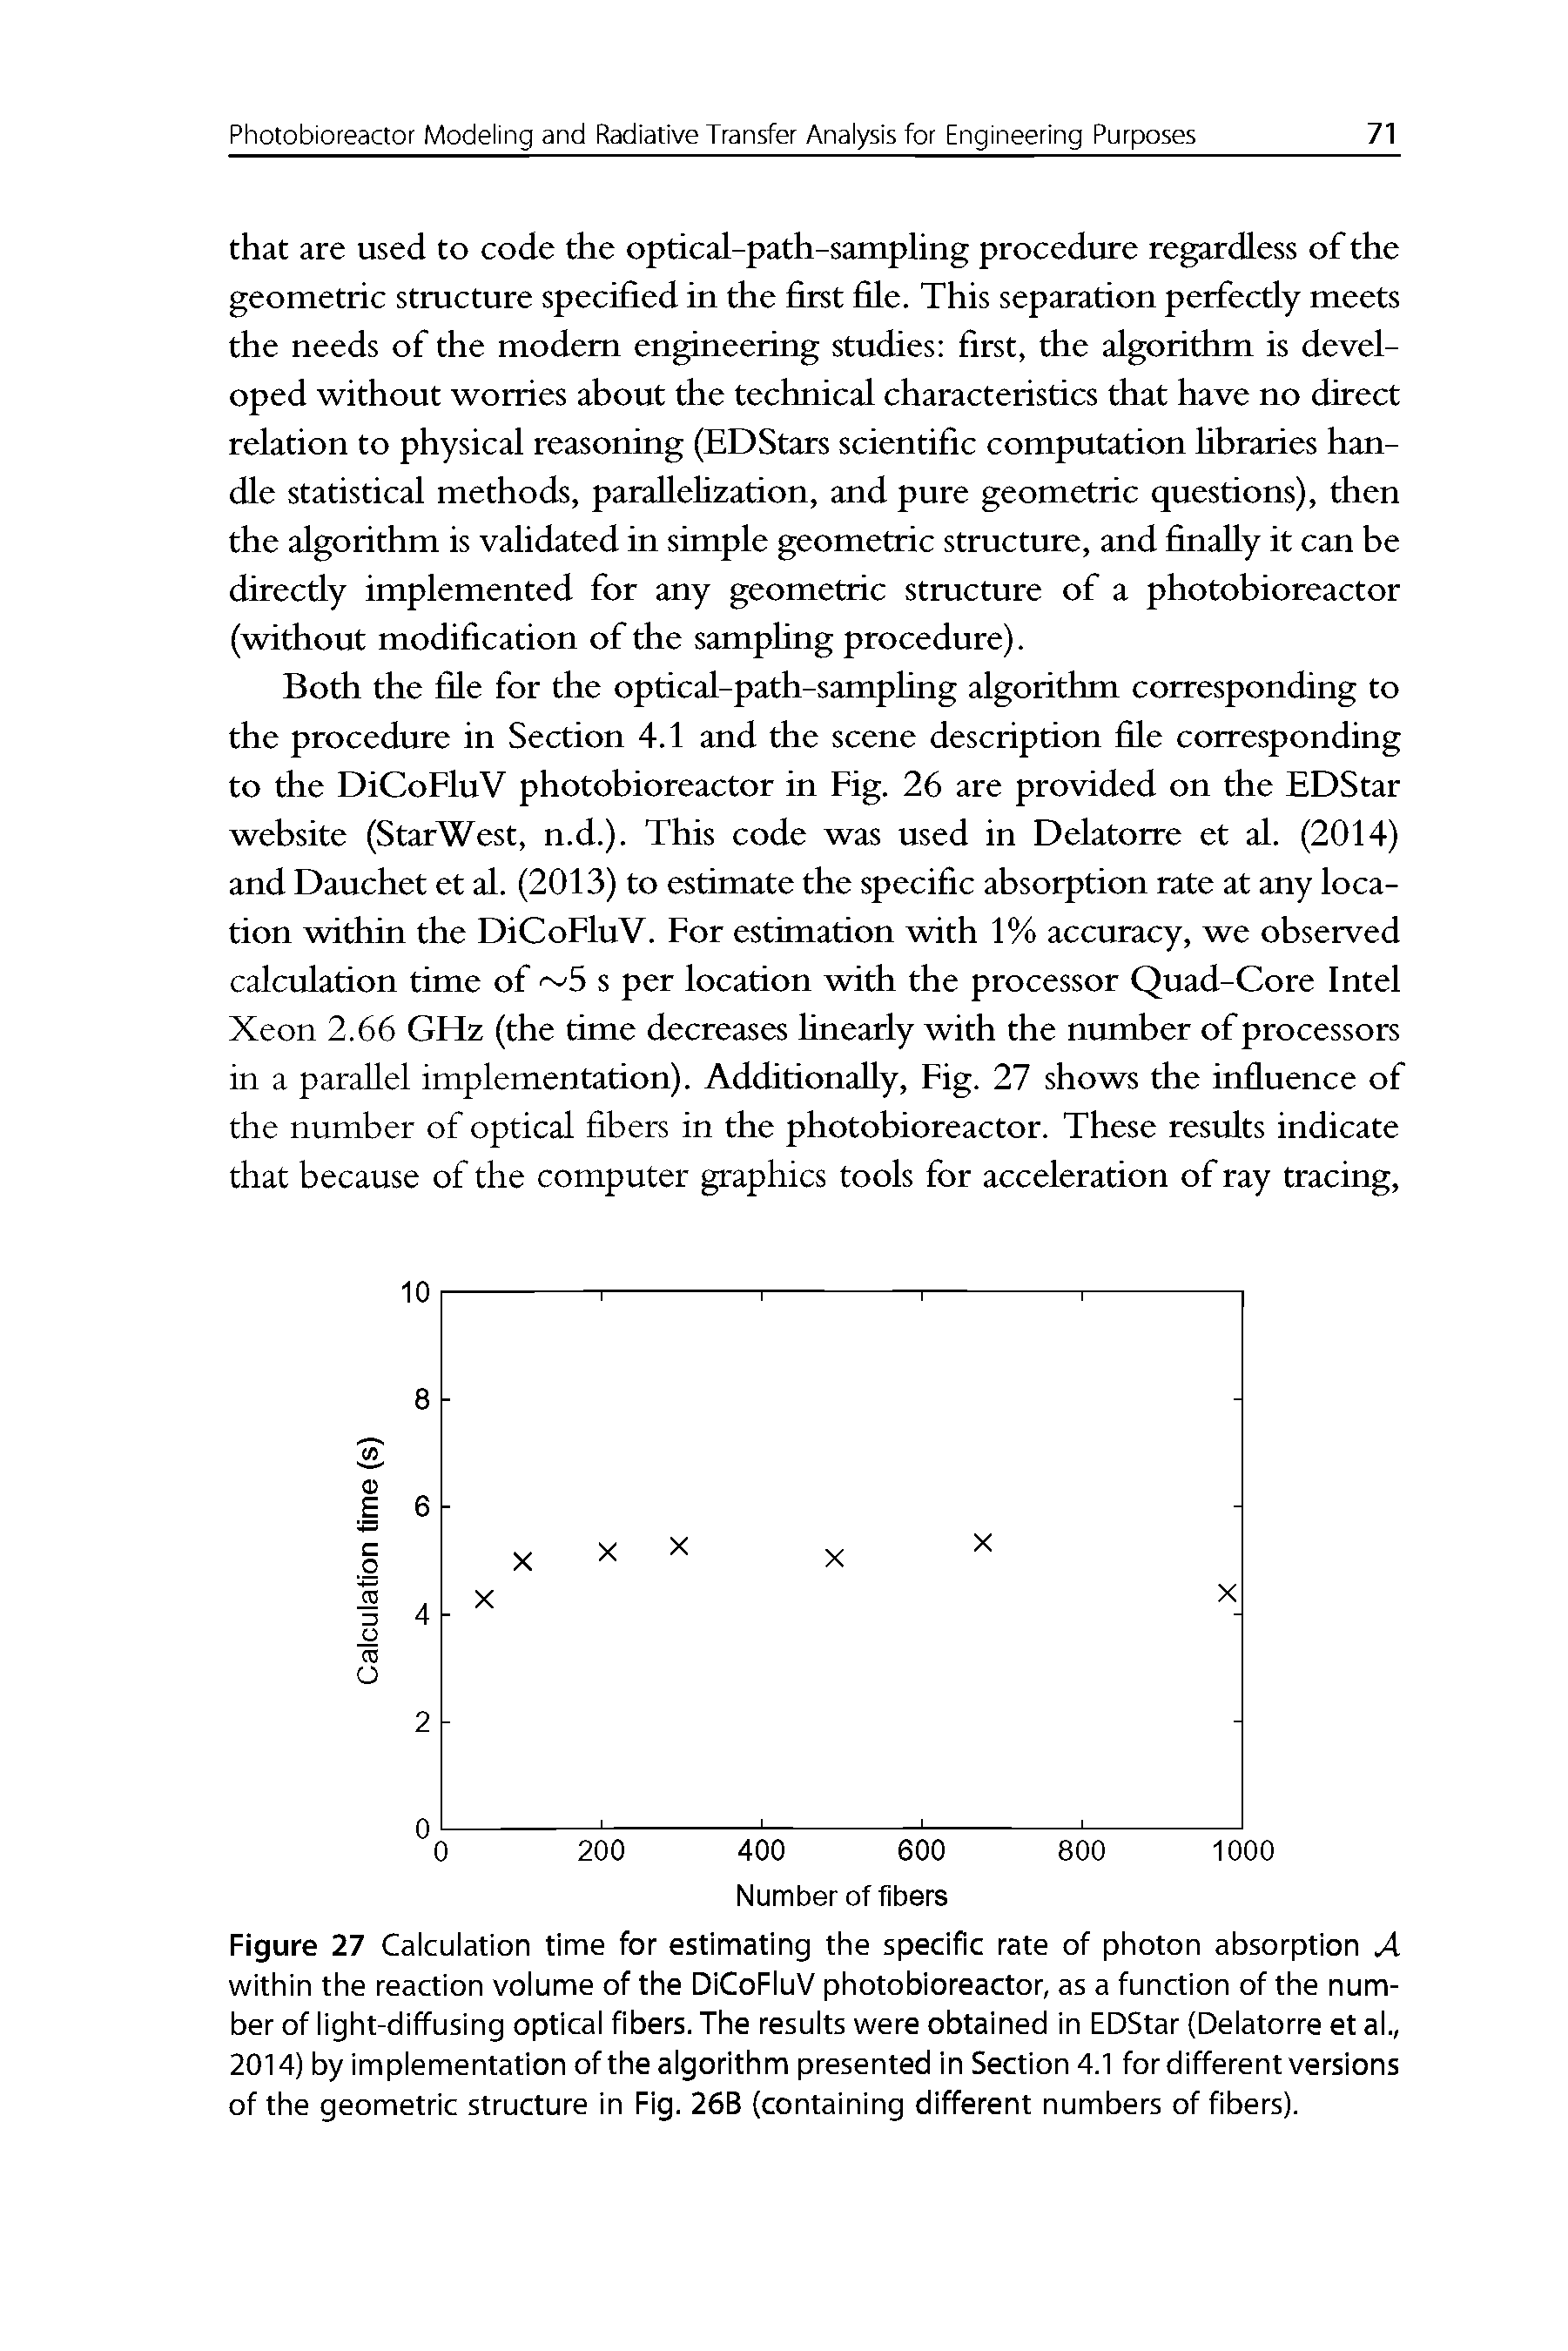 Figure 27 Calculation time for estimating the specific rate of photon absorption A within the reaction volume of the DiCoFluV photobioreactor, as a function of the number of light-diffusing optical fibers. The results were obtained in EDStar (Delatorre et al., 2014) by implementation of the algorithm presented in Section 4.1 for different versions of the geometric structure in Fig. 26B (containing different numbers of fibers).